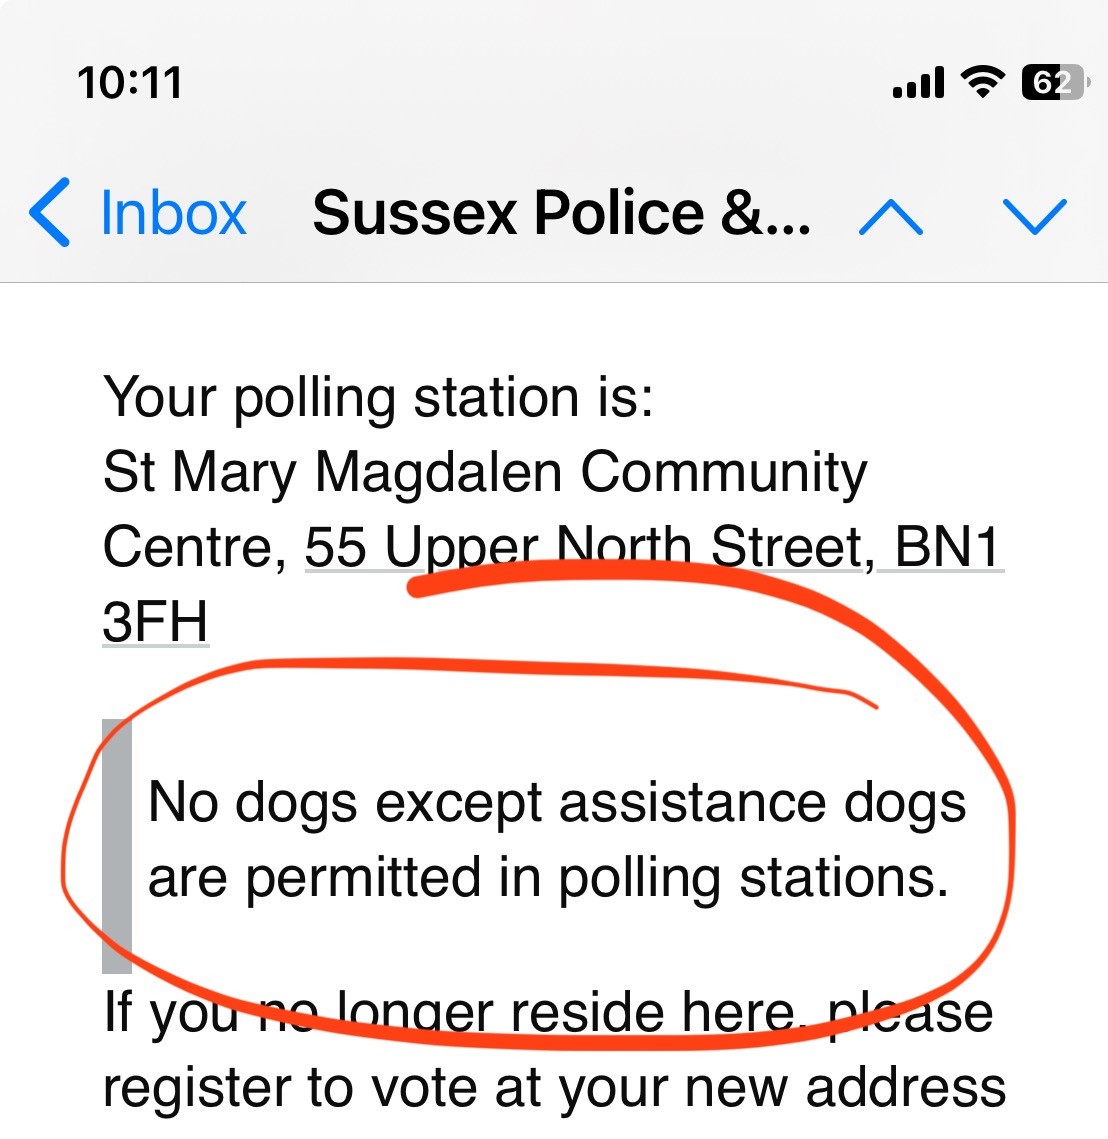 An email stating: “No dogs except assistance dogs are permitted in polling stations.”